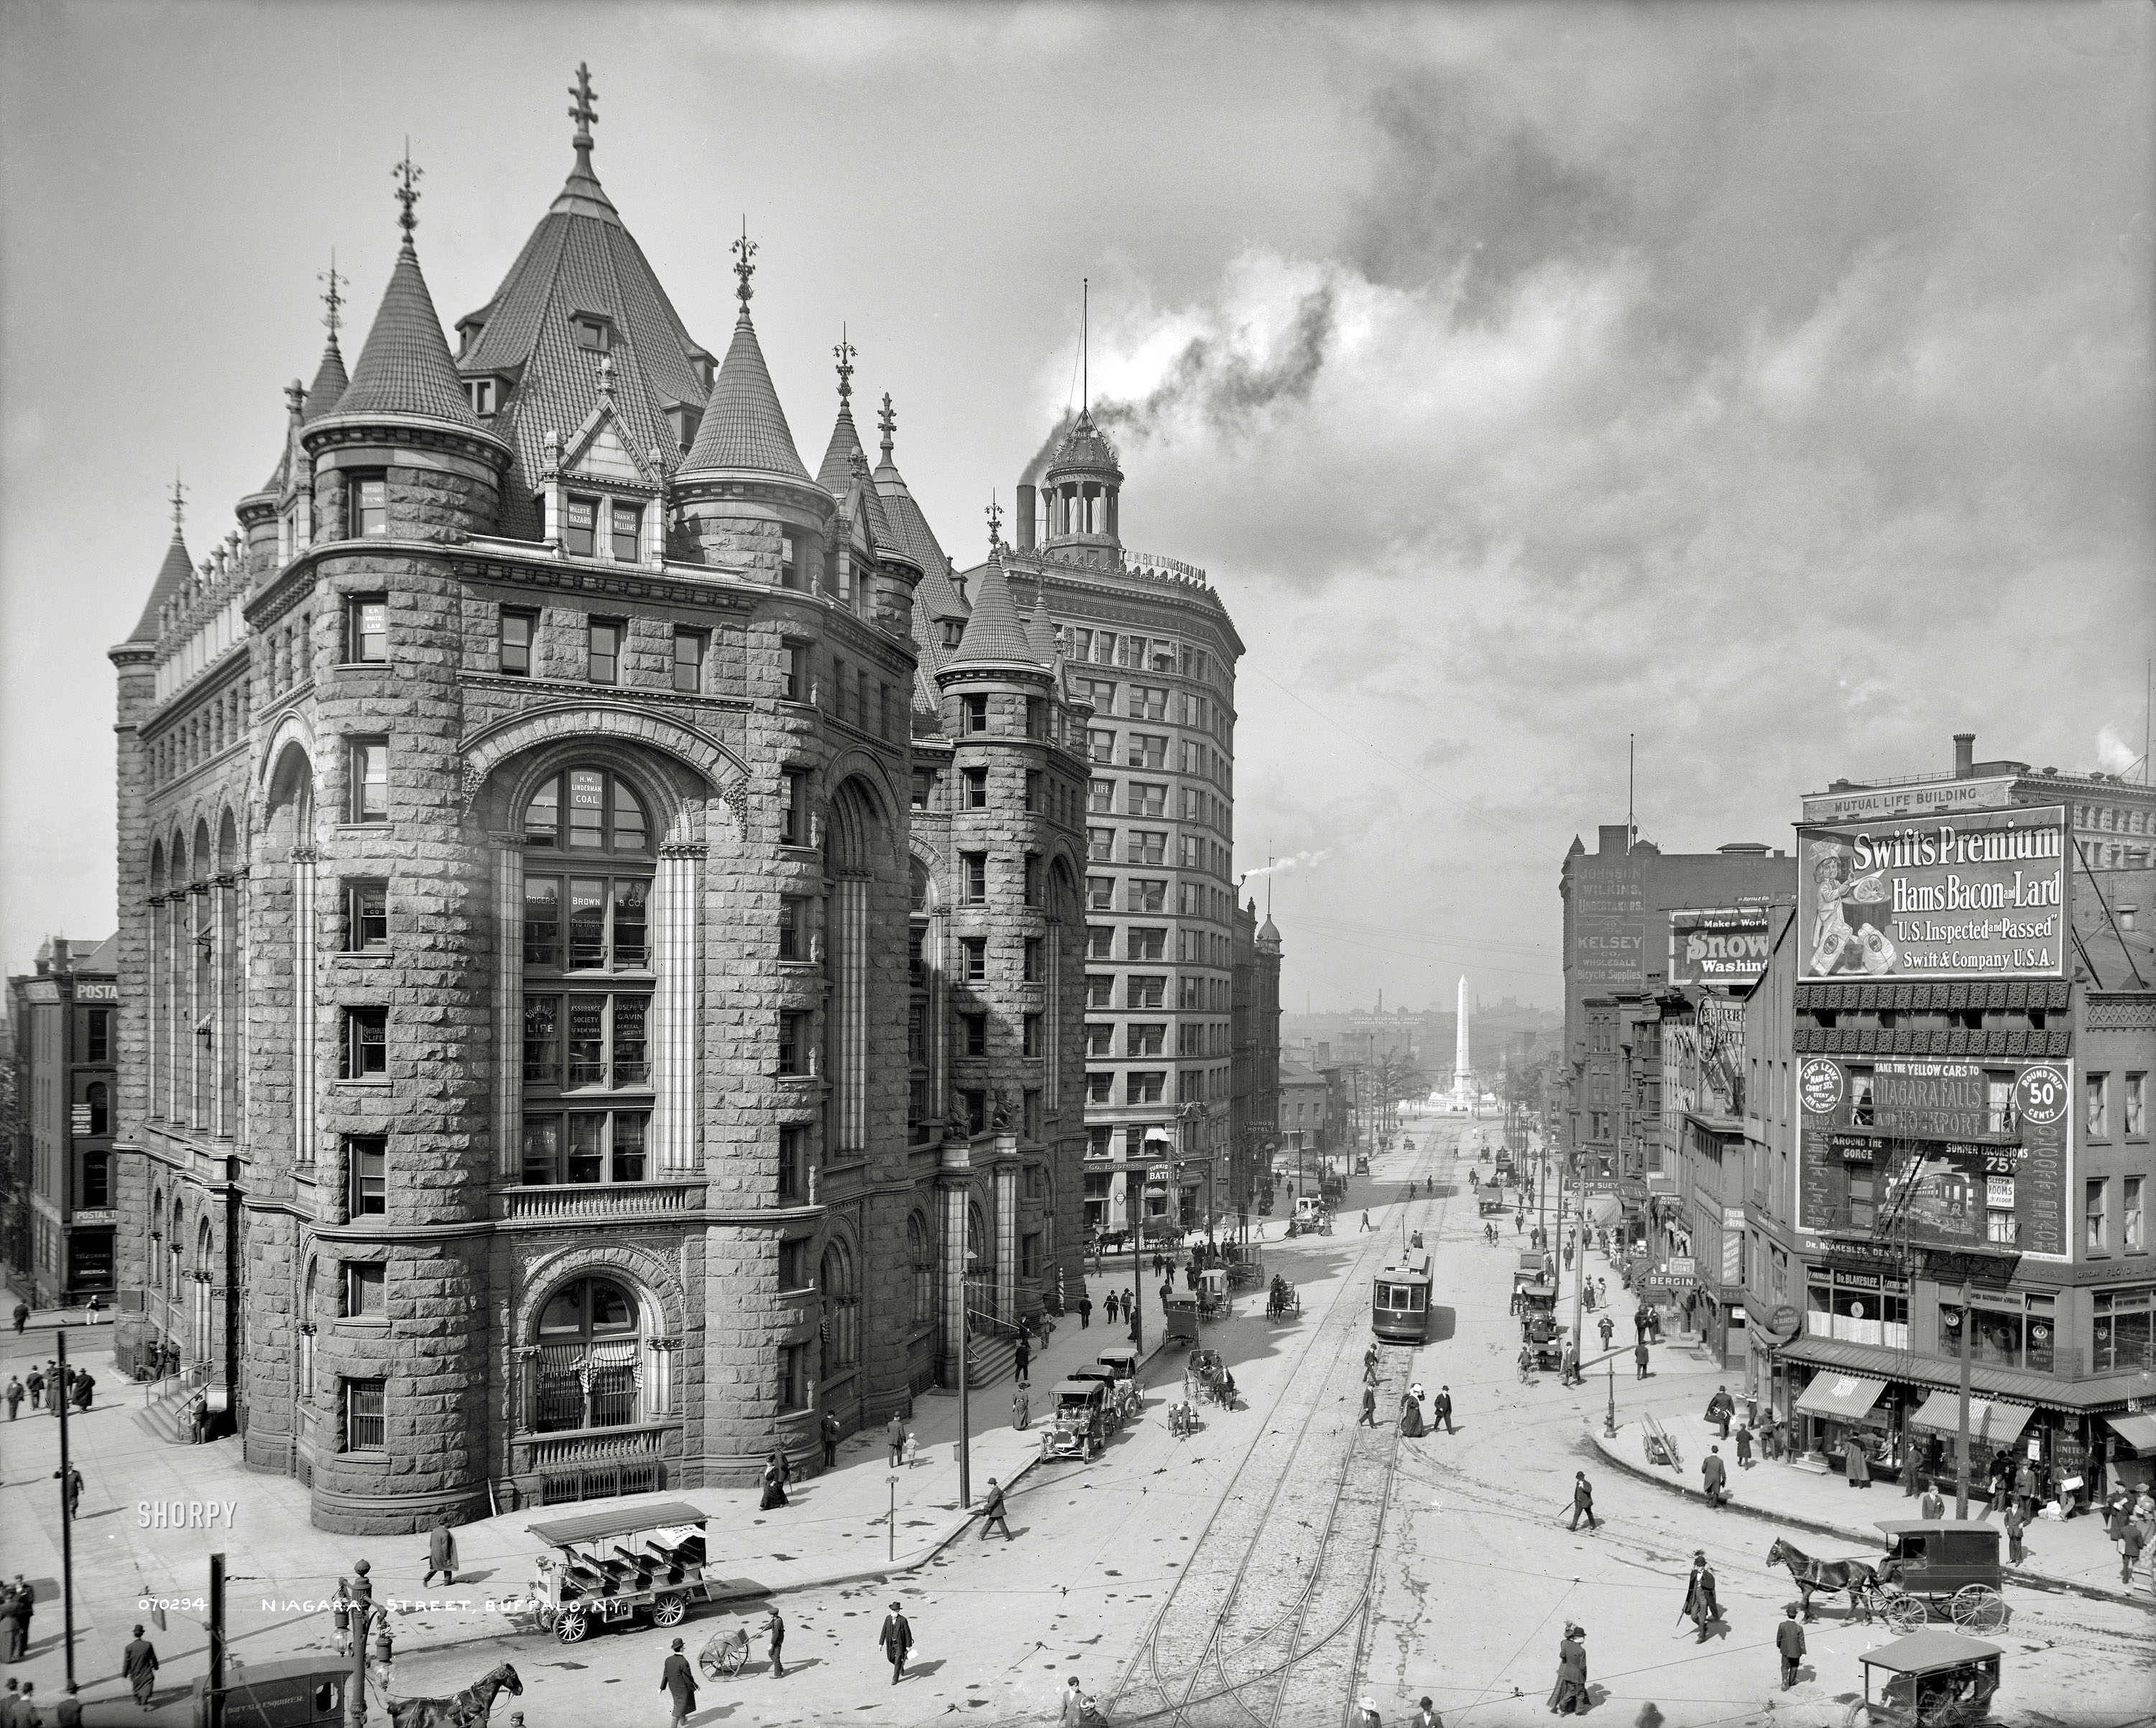 Bustling Buffalo, New York, circa 1908. "Erie County Savings Bank, Niagara Street." Another view of the imposing edifice previously seen here. 8x10 inch dry plate glass negative, Detroit Publishing Company. View full size.